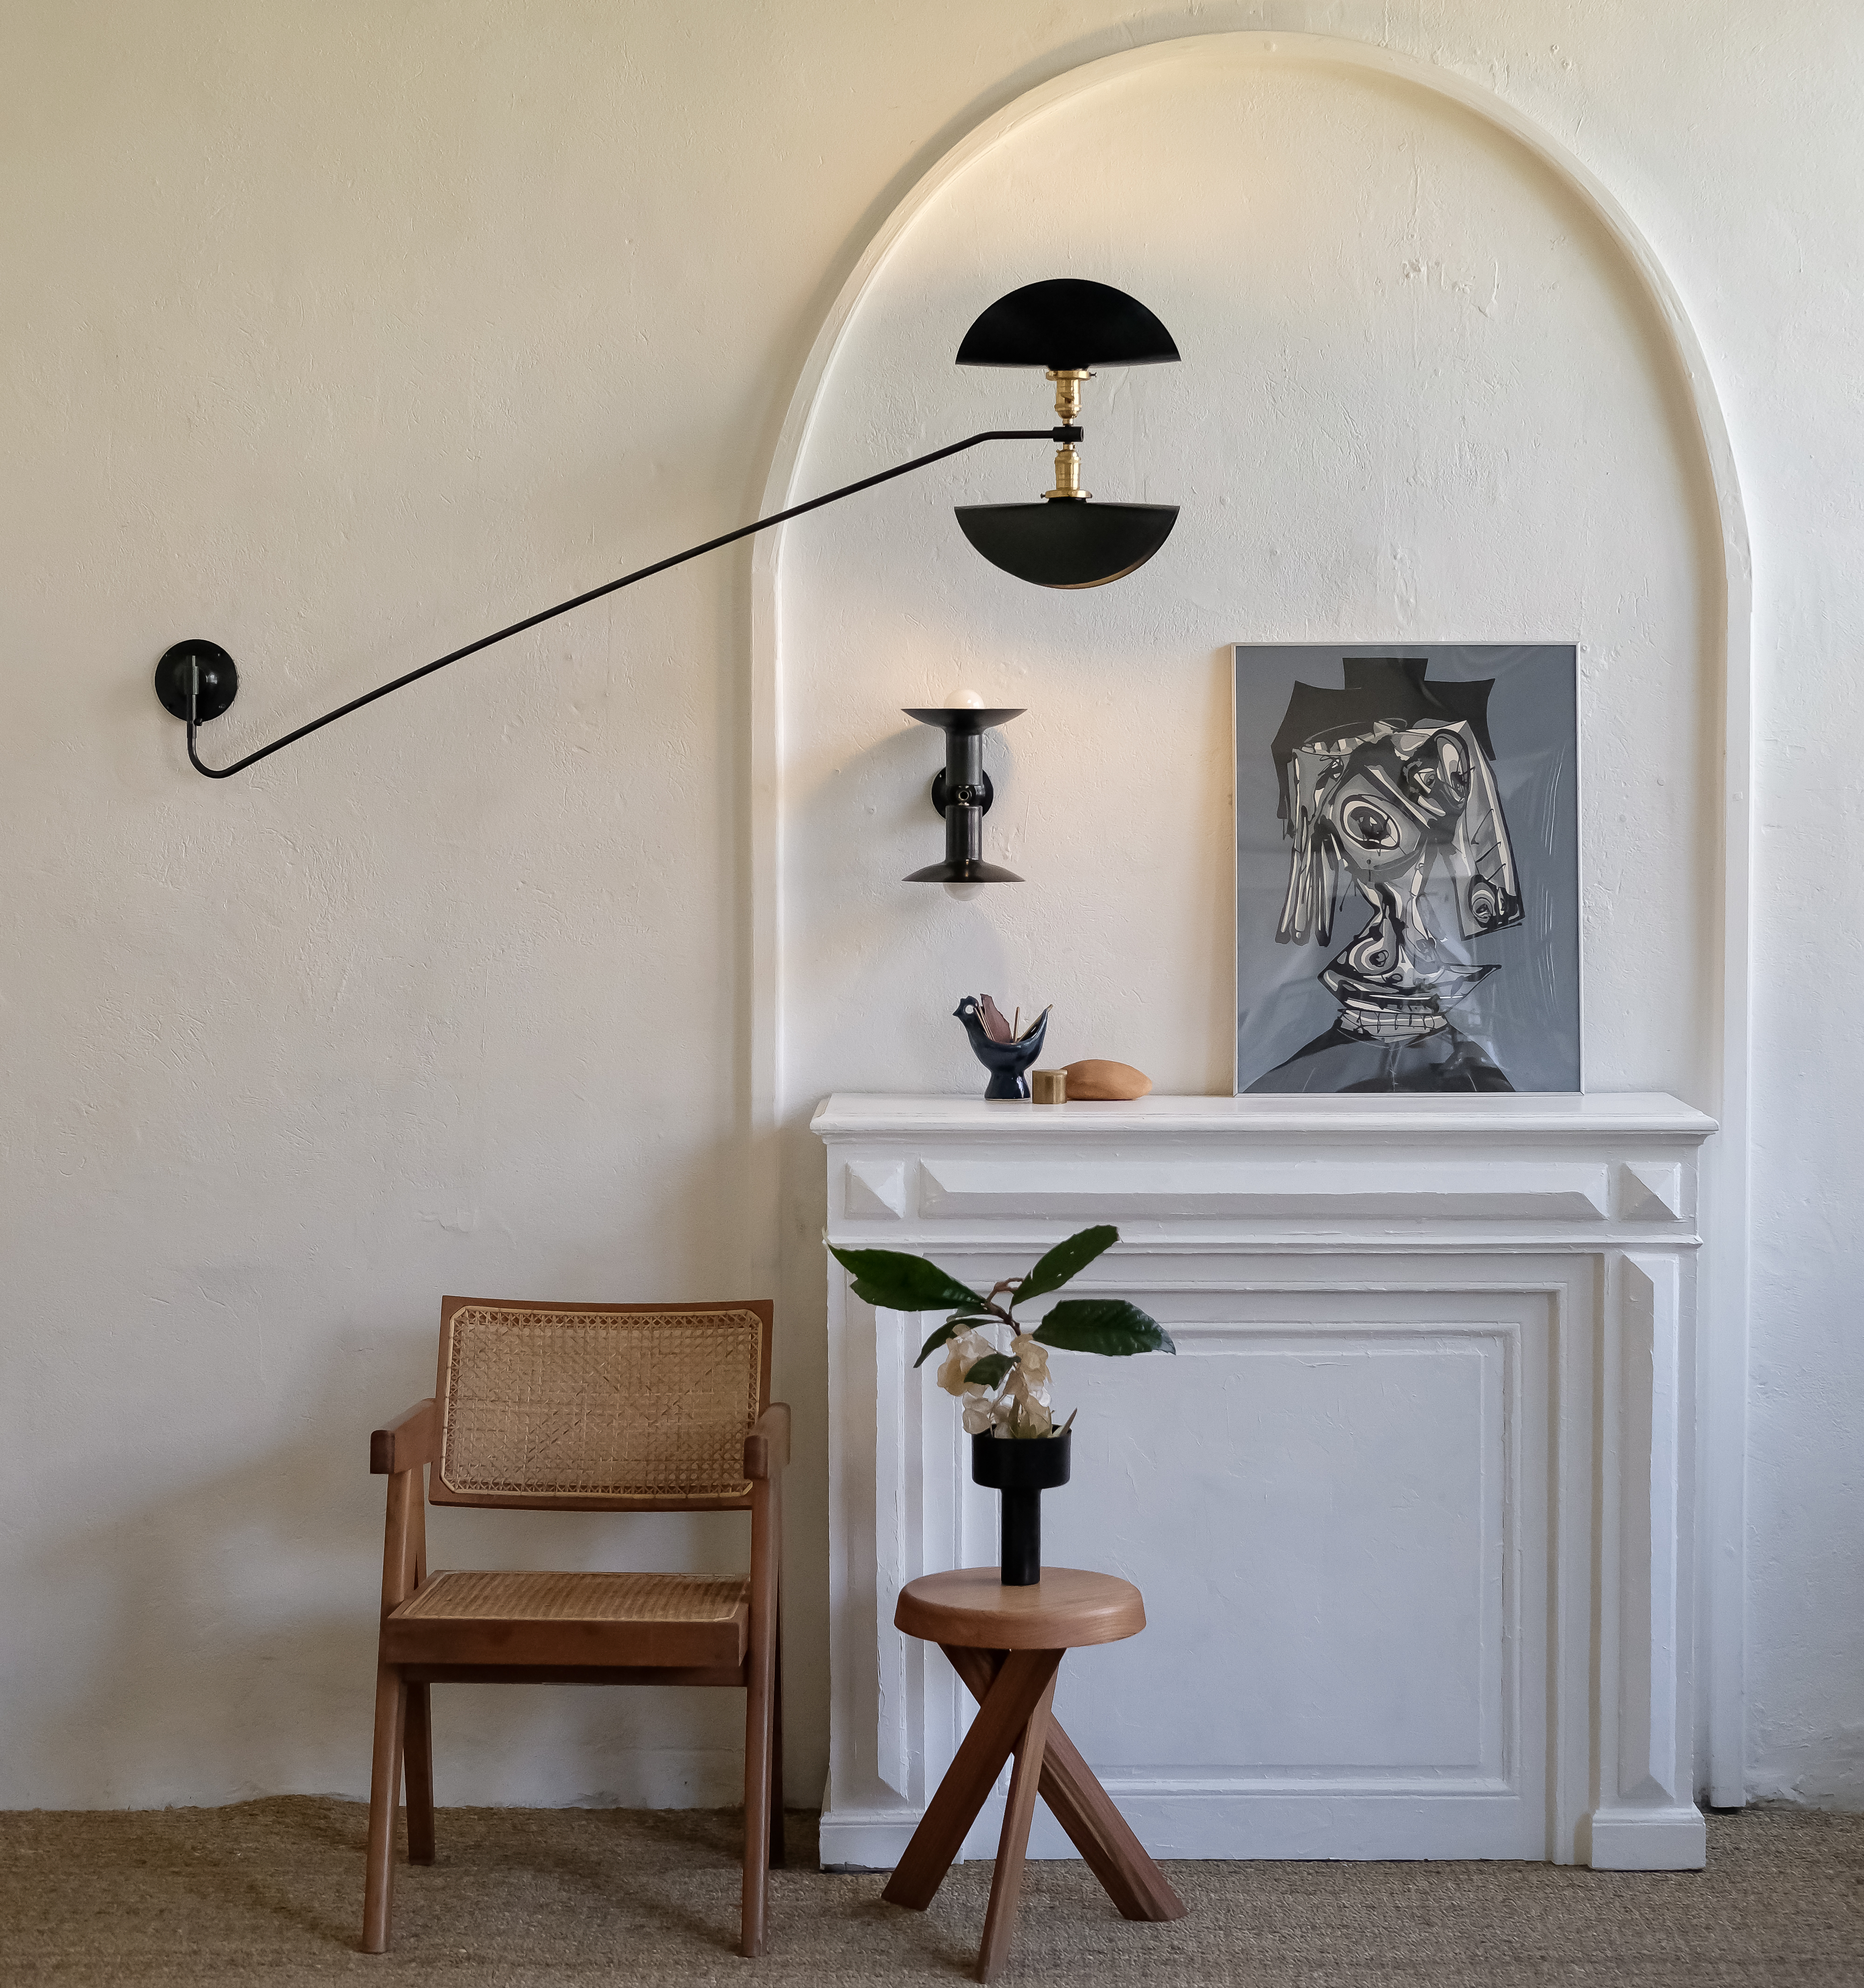 Swing wall lamp diabolo made in france craftsman